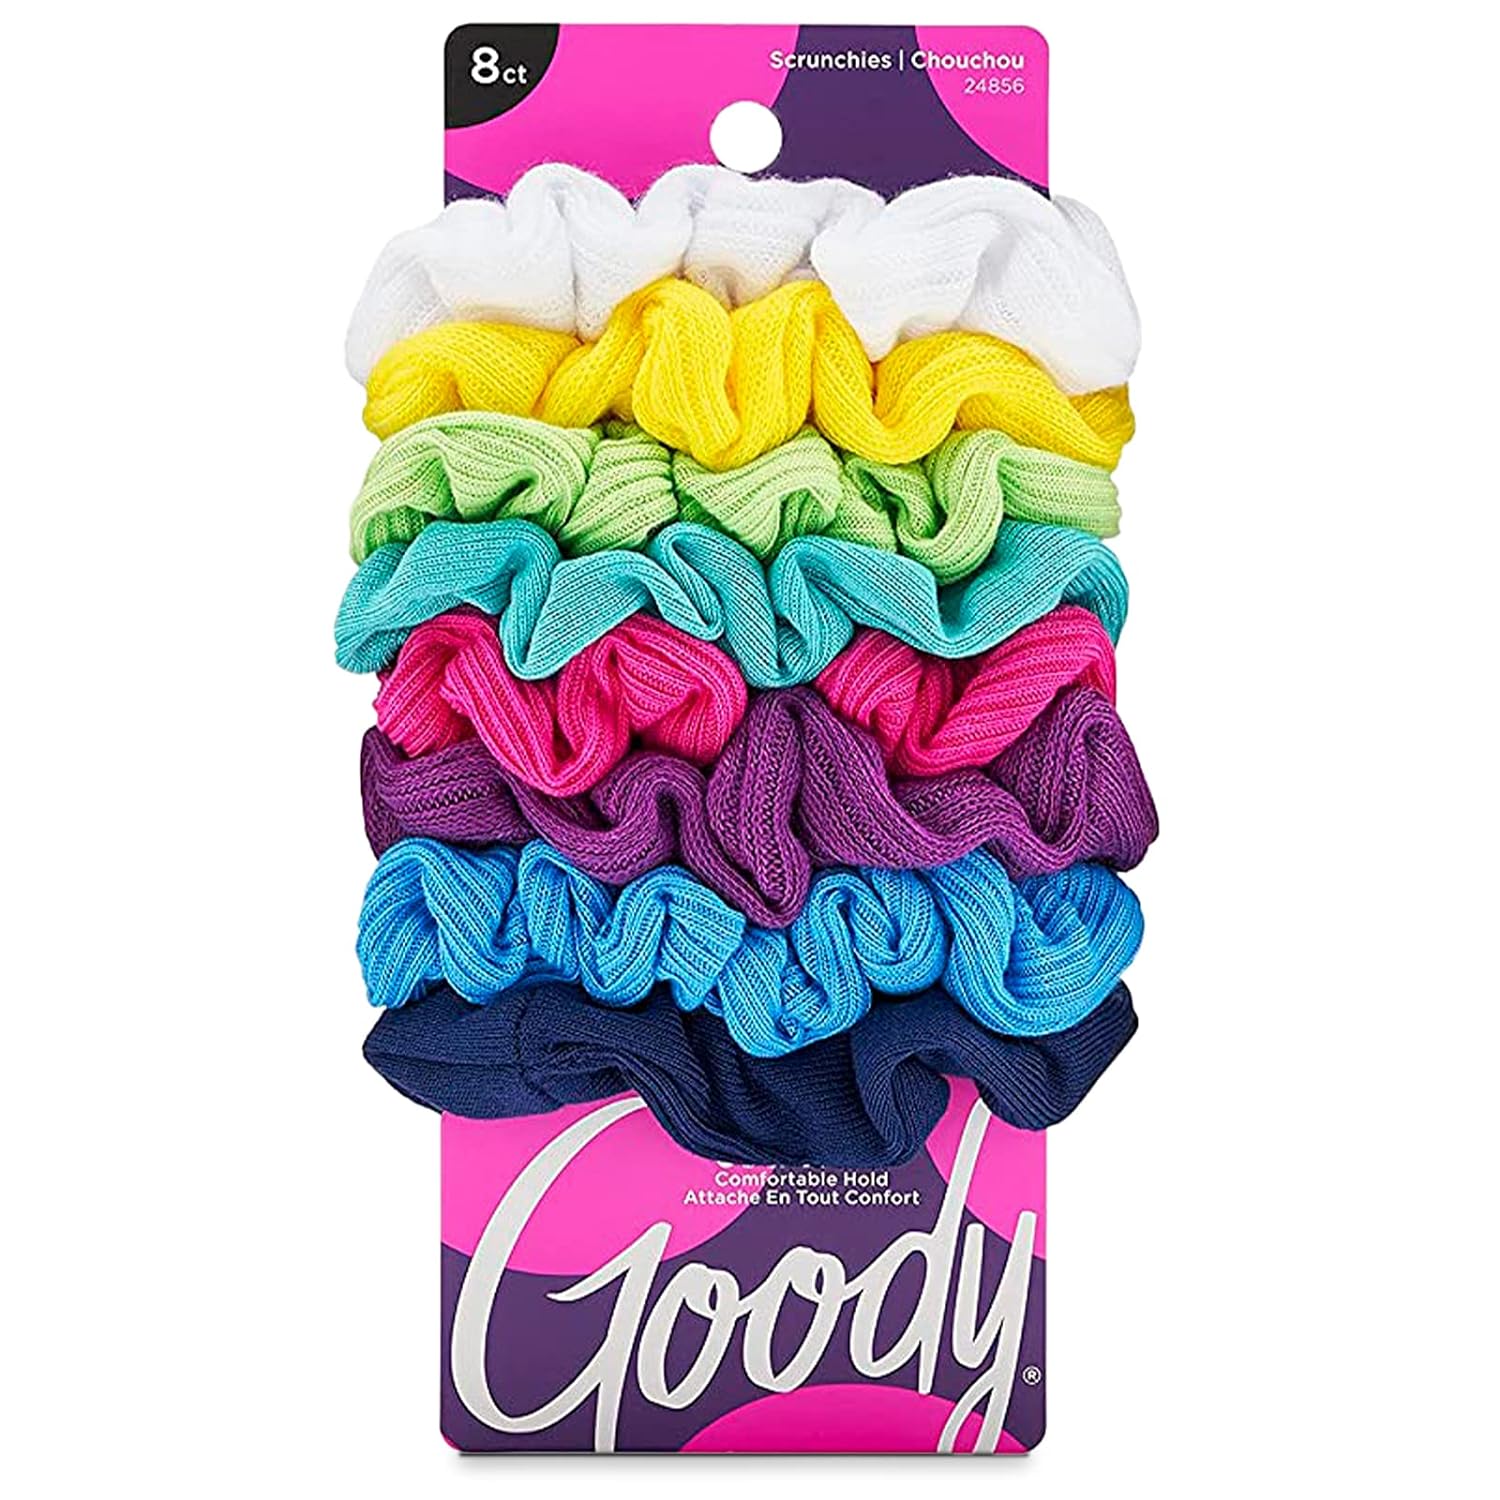 Item # 3000146 Goody Ouchless Jersey Variety Scrunchies 8CT UPC 041457248560. MIN Pack: 72 (18-4's)